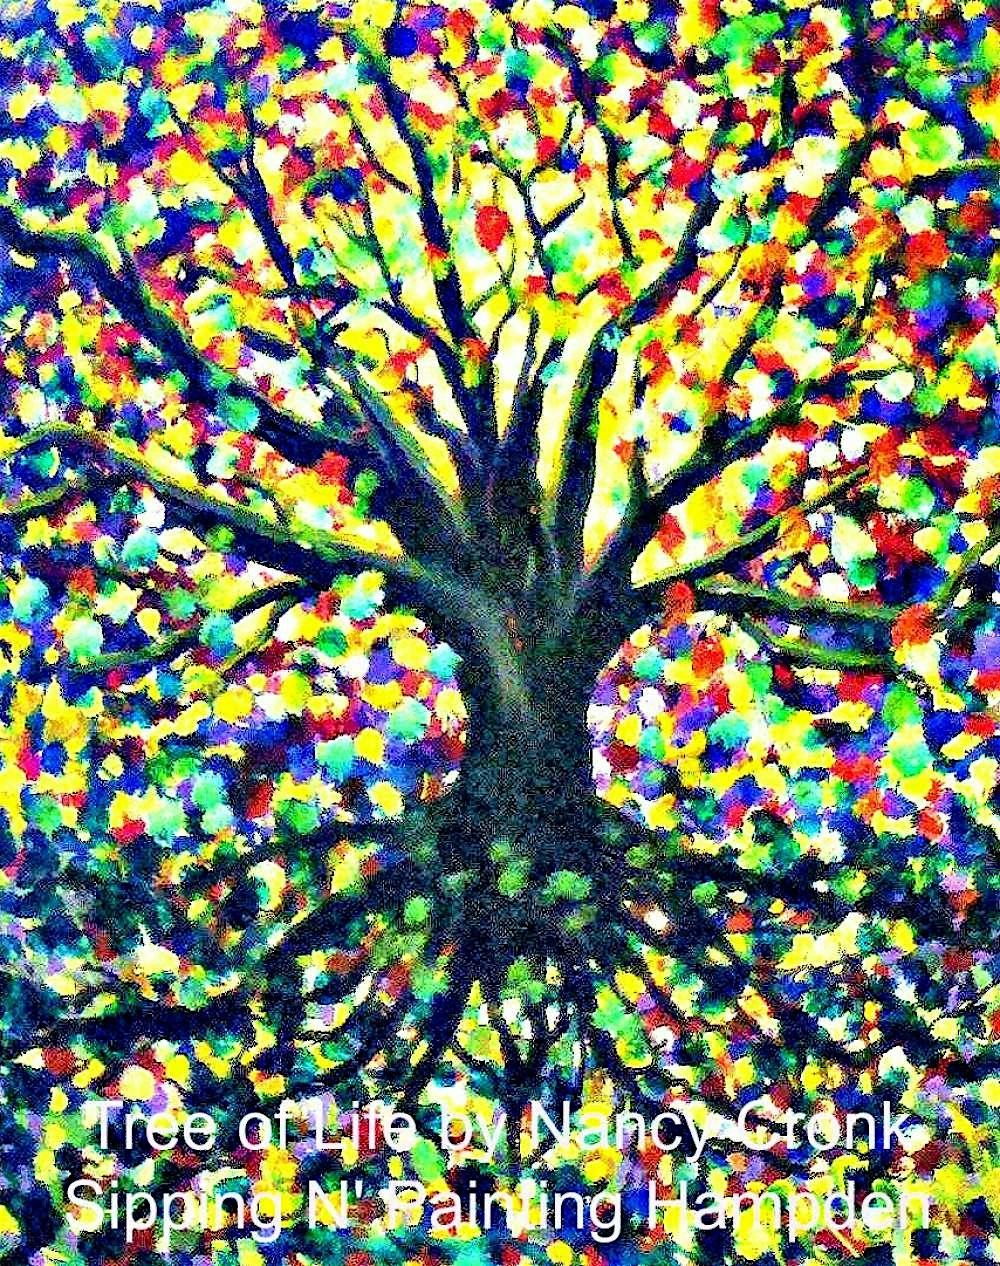 IN-STUDIO CLASS Tree of Life Thurs. May 16th 6:30pm $35